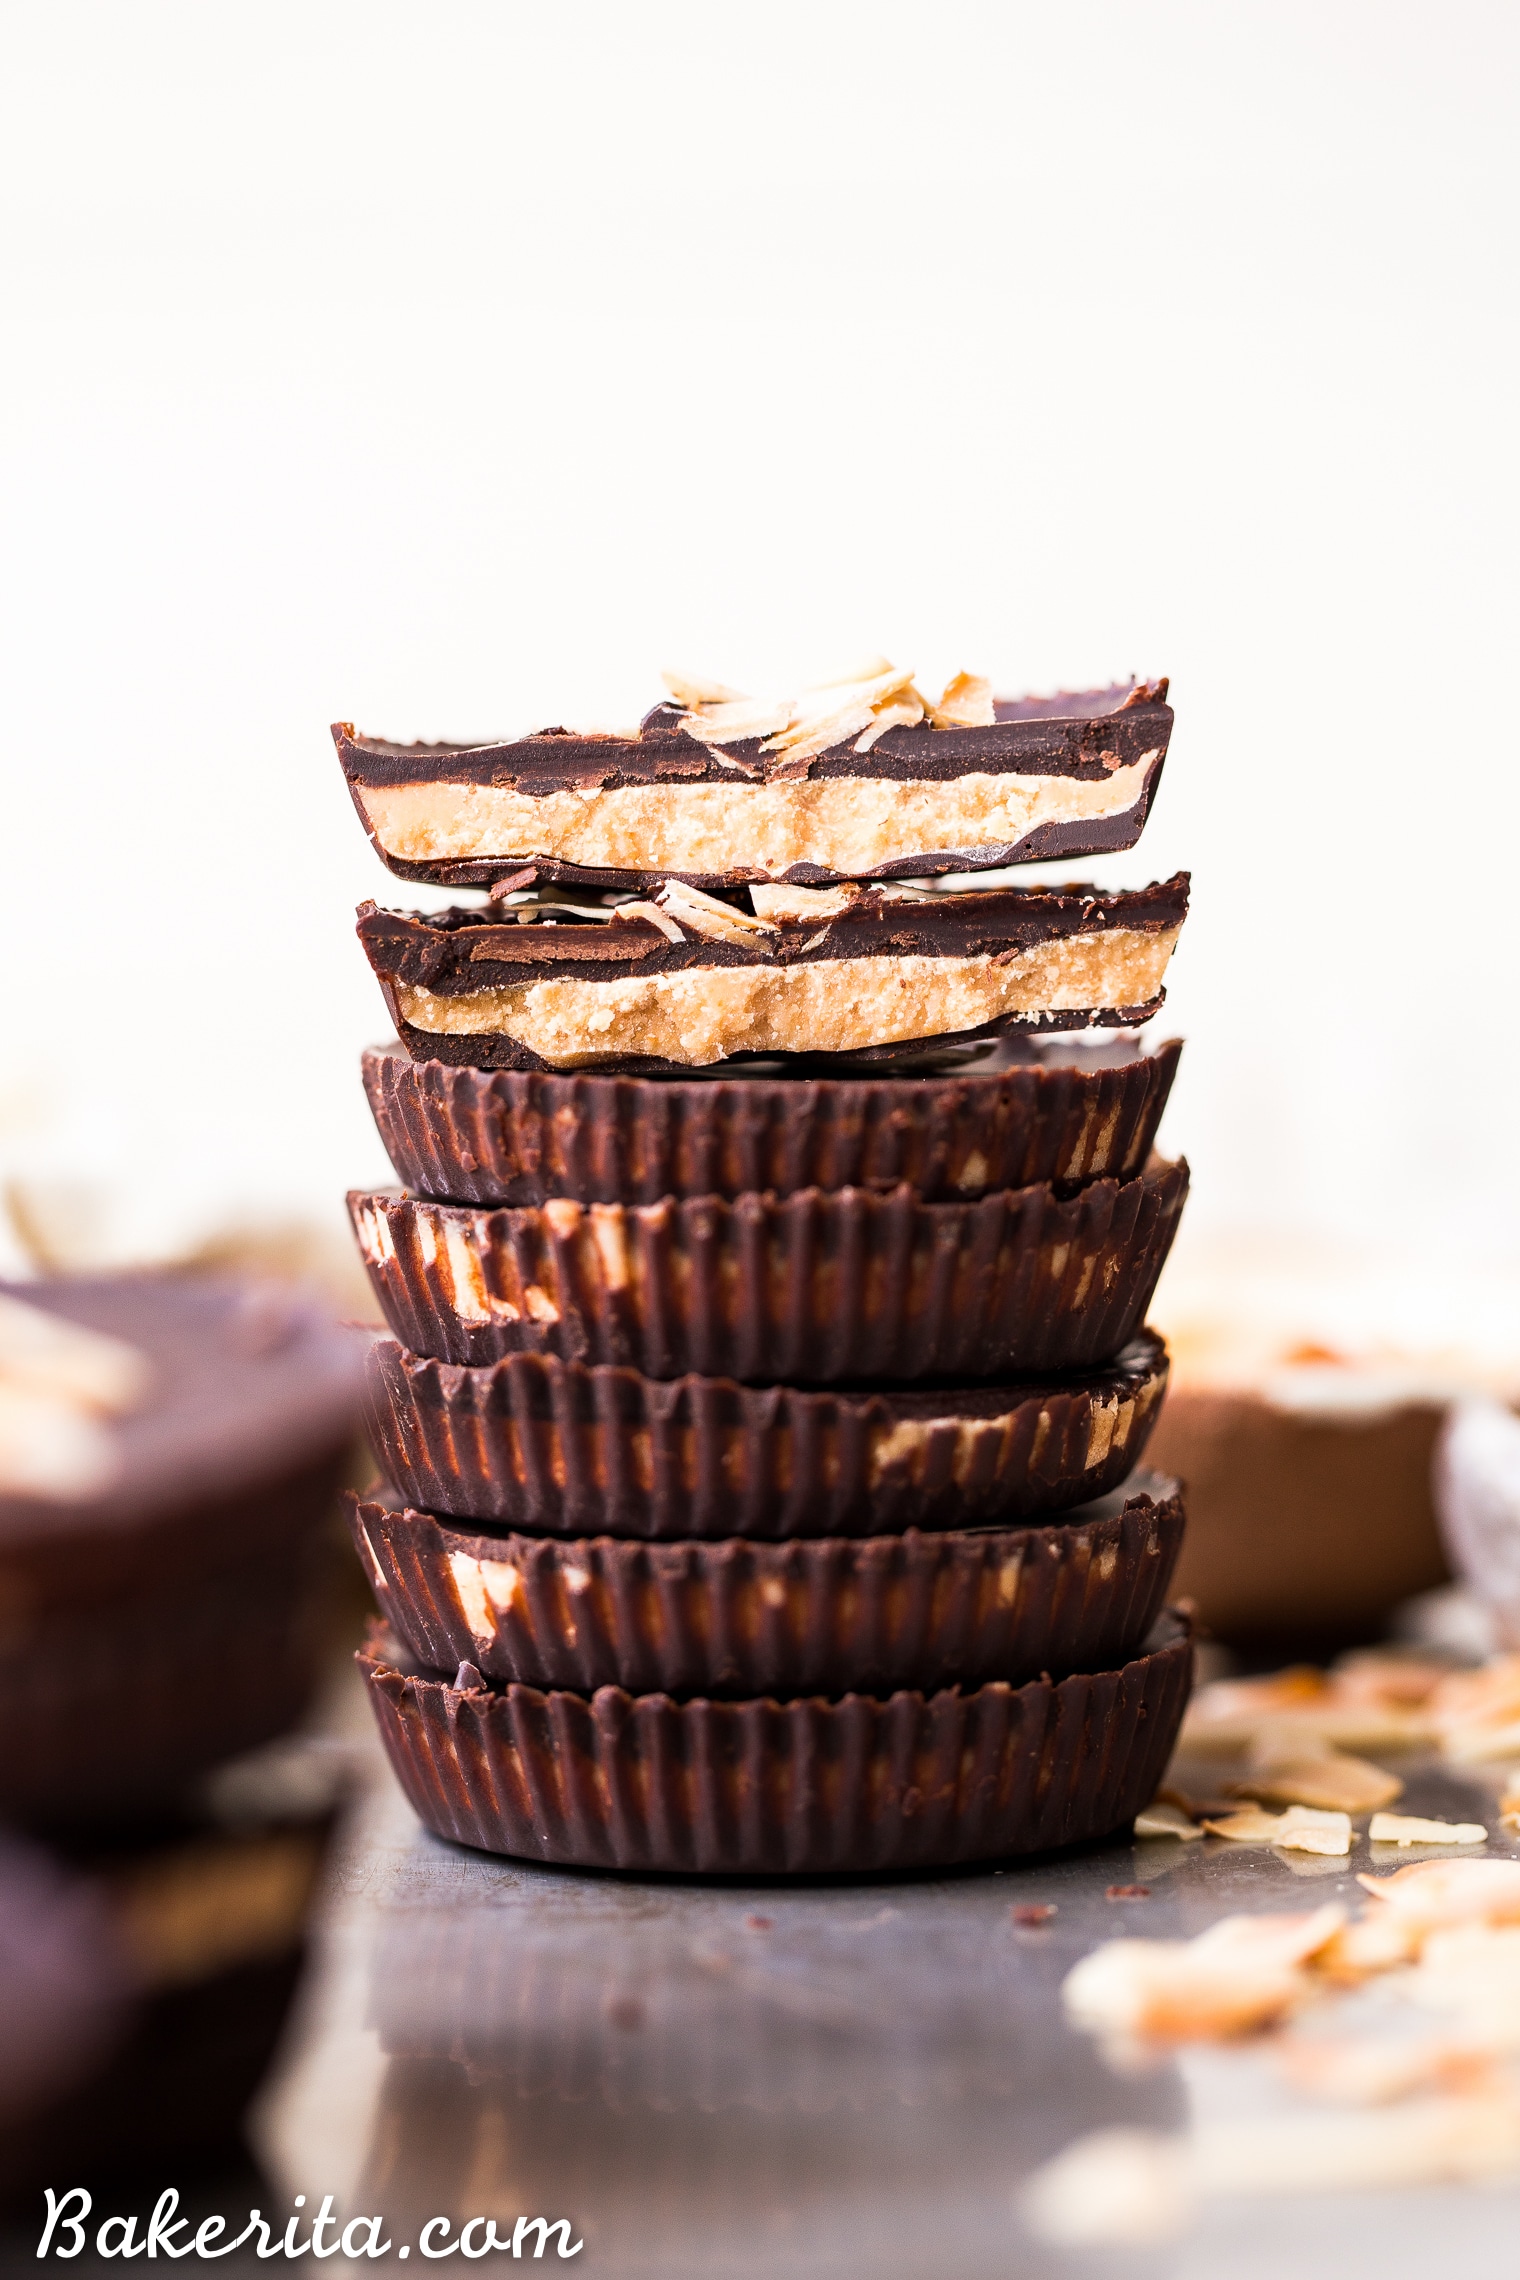 These Toasted Coconut Butter Cups are made with just four simple ingredients! Toasted coconut butter is the star of the show, encased in decadent homemade chocolate for a healthy homemade candy that will satisfy your sweet tooth. You're going to love these paleo + vegan coconut butter cups.